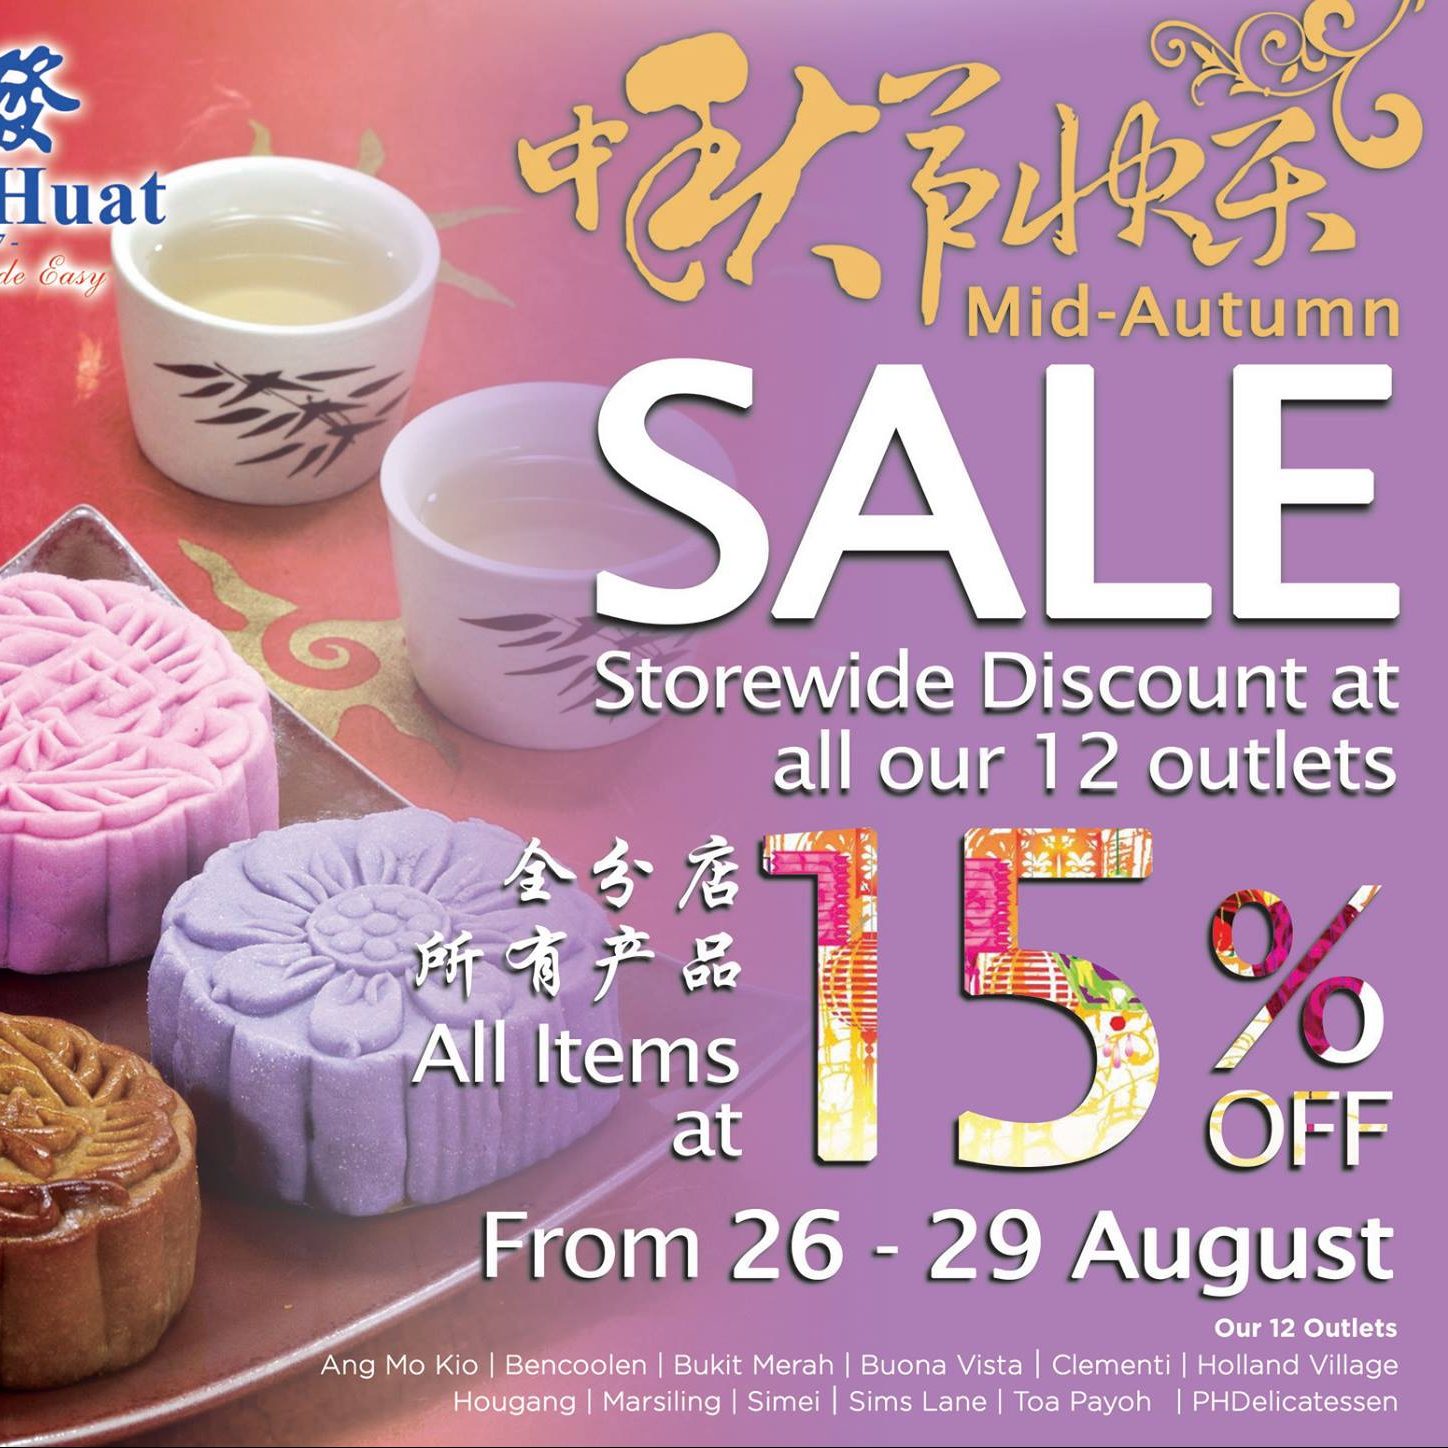 Phoon Huat Singapore Mid-Autumn Sale Make Your Own Mooncake Promotion 26 to 29 Aug 2016